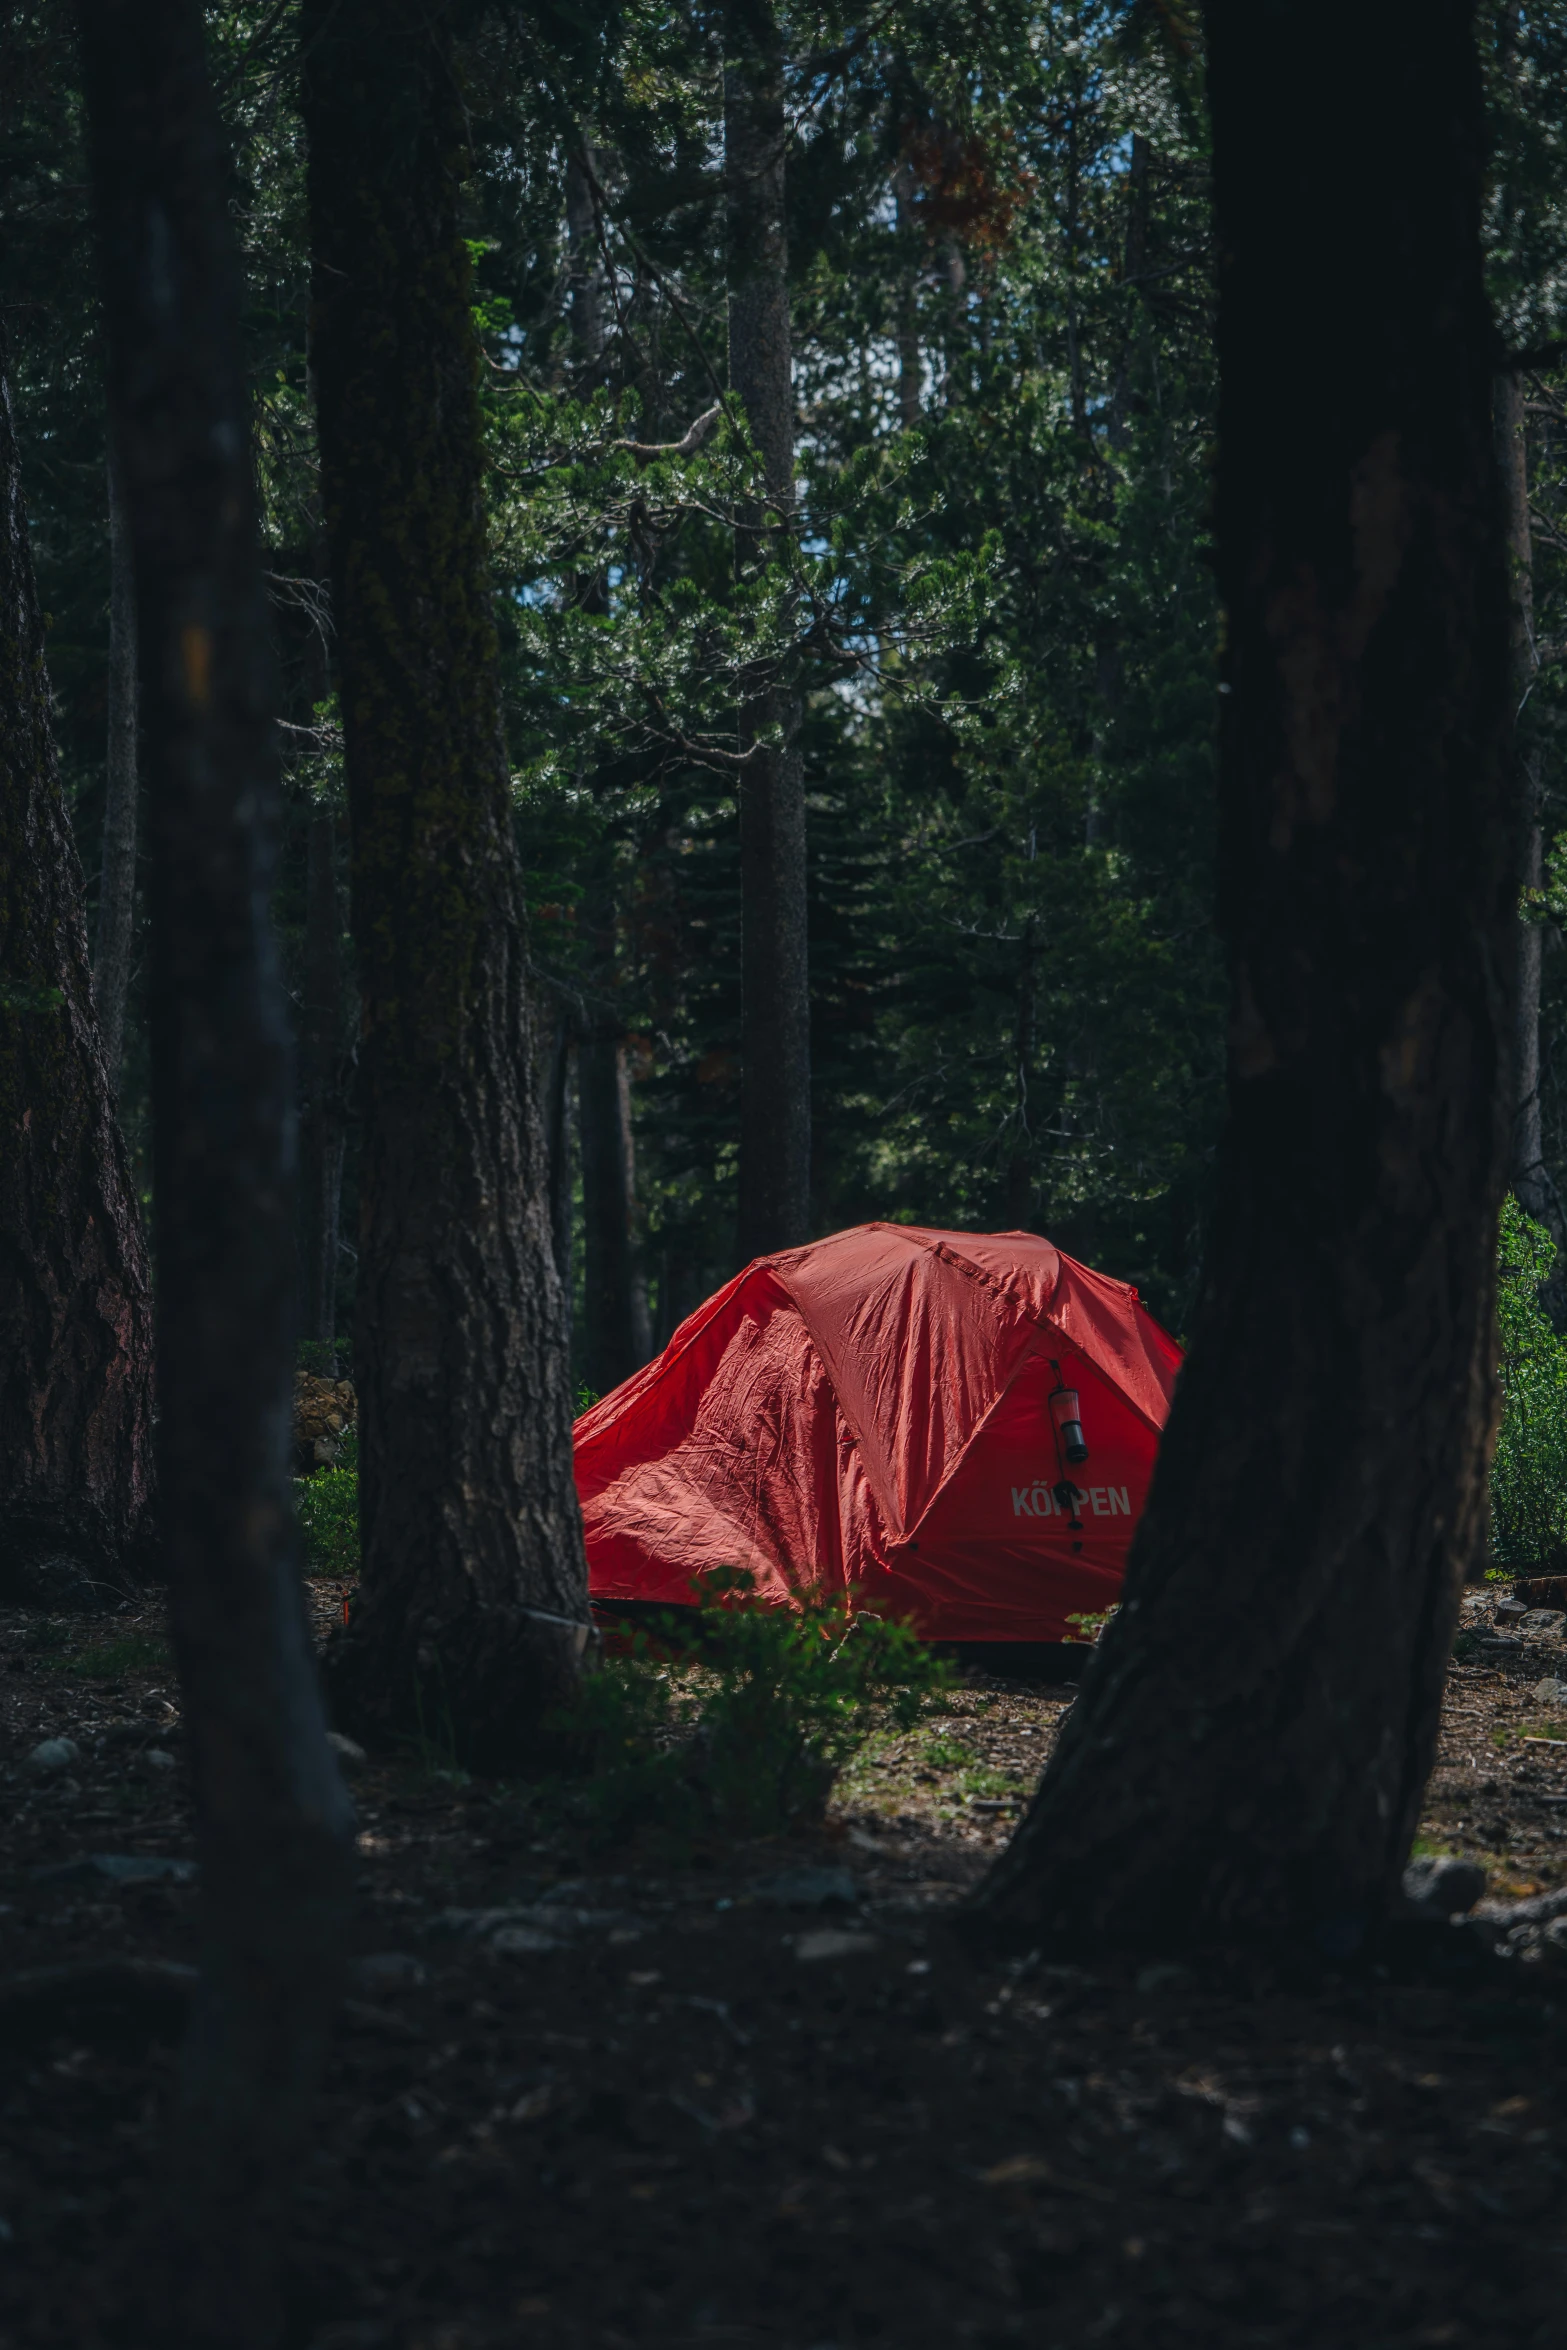 the large red umbrella is in the middle of the forest